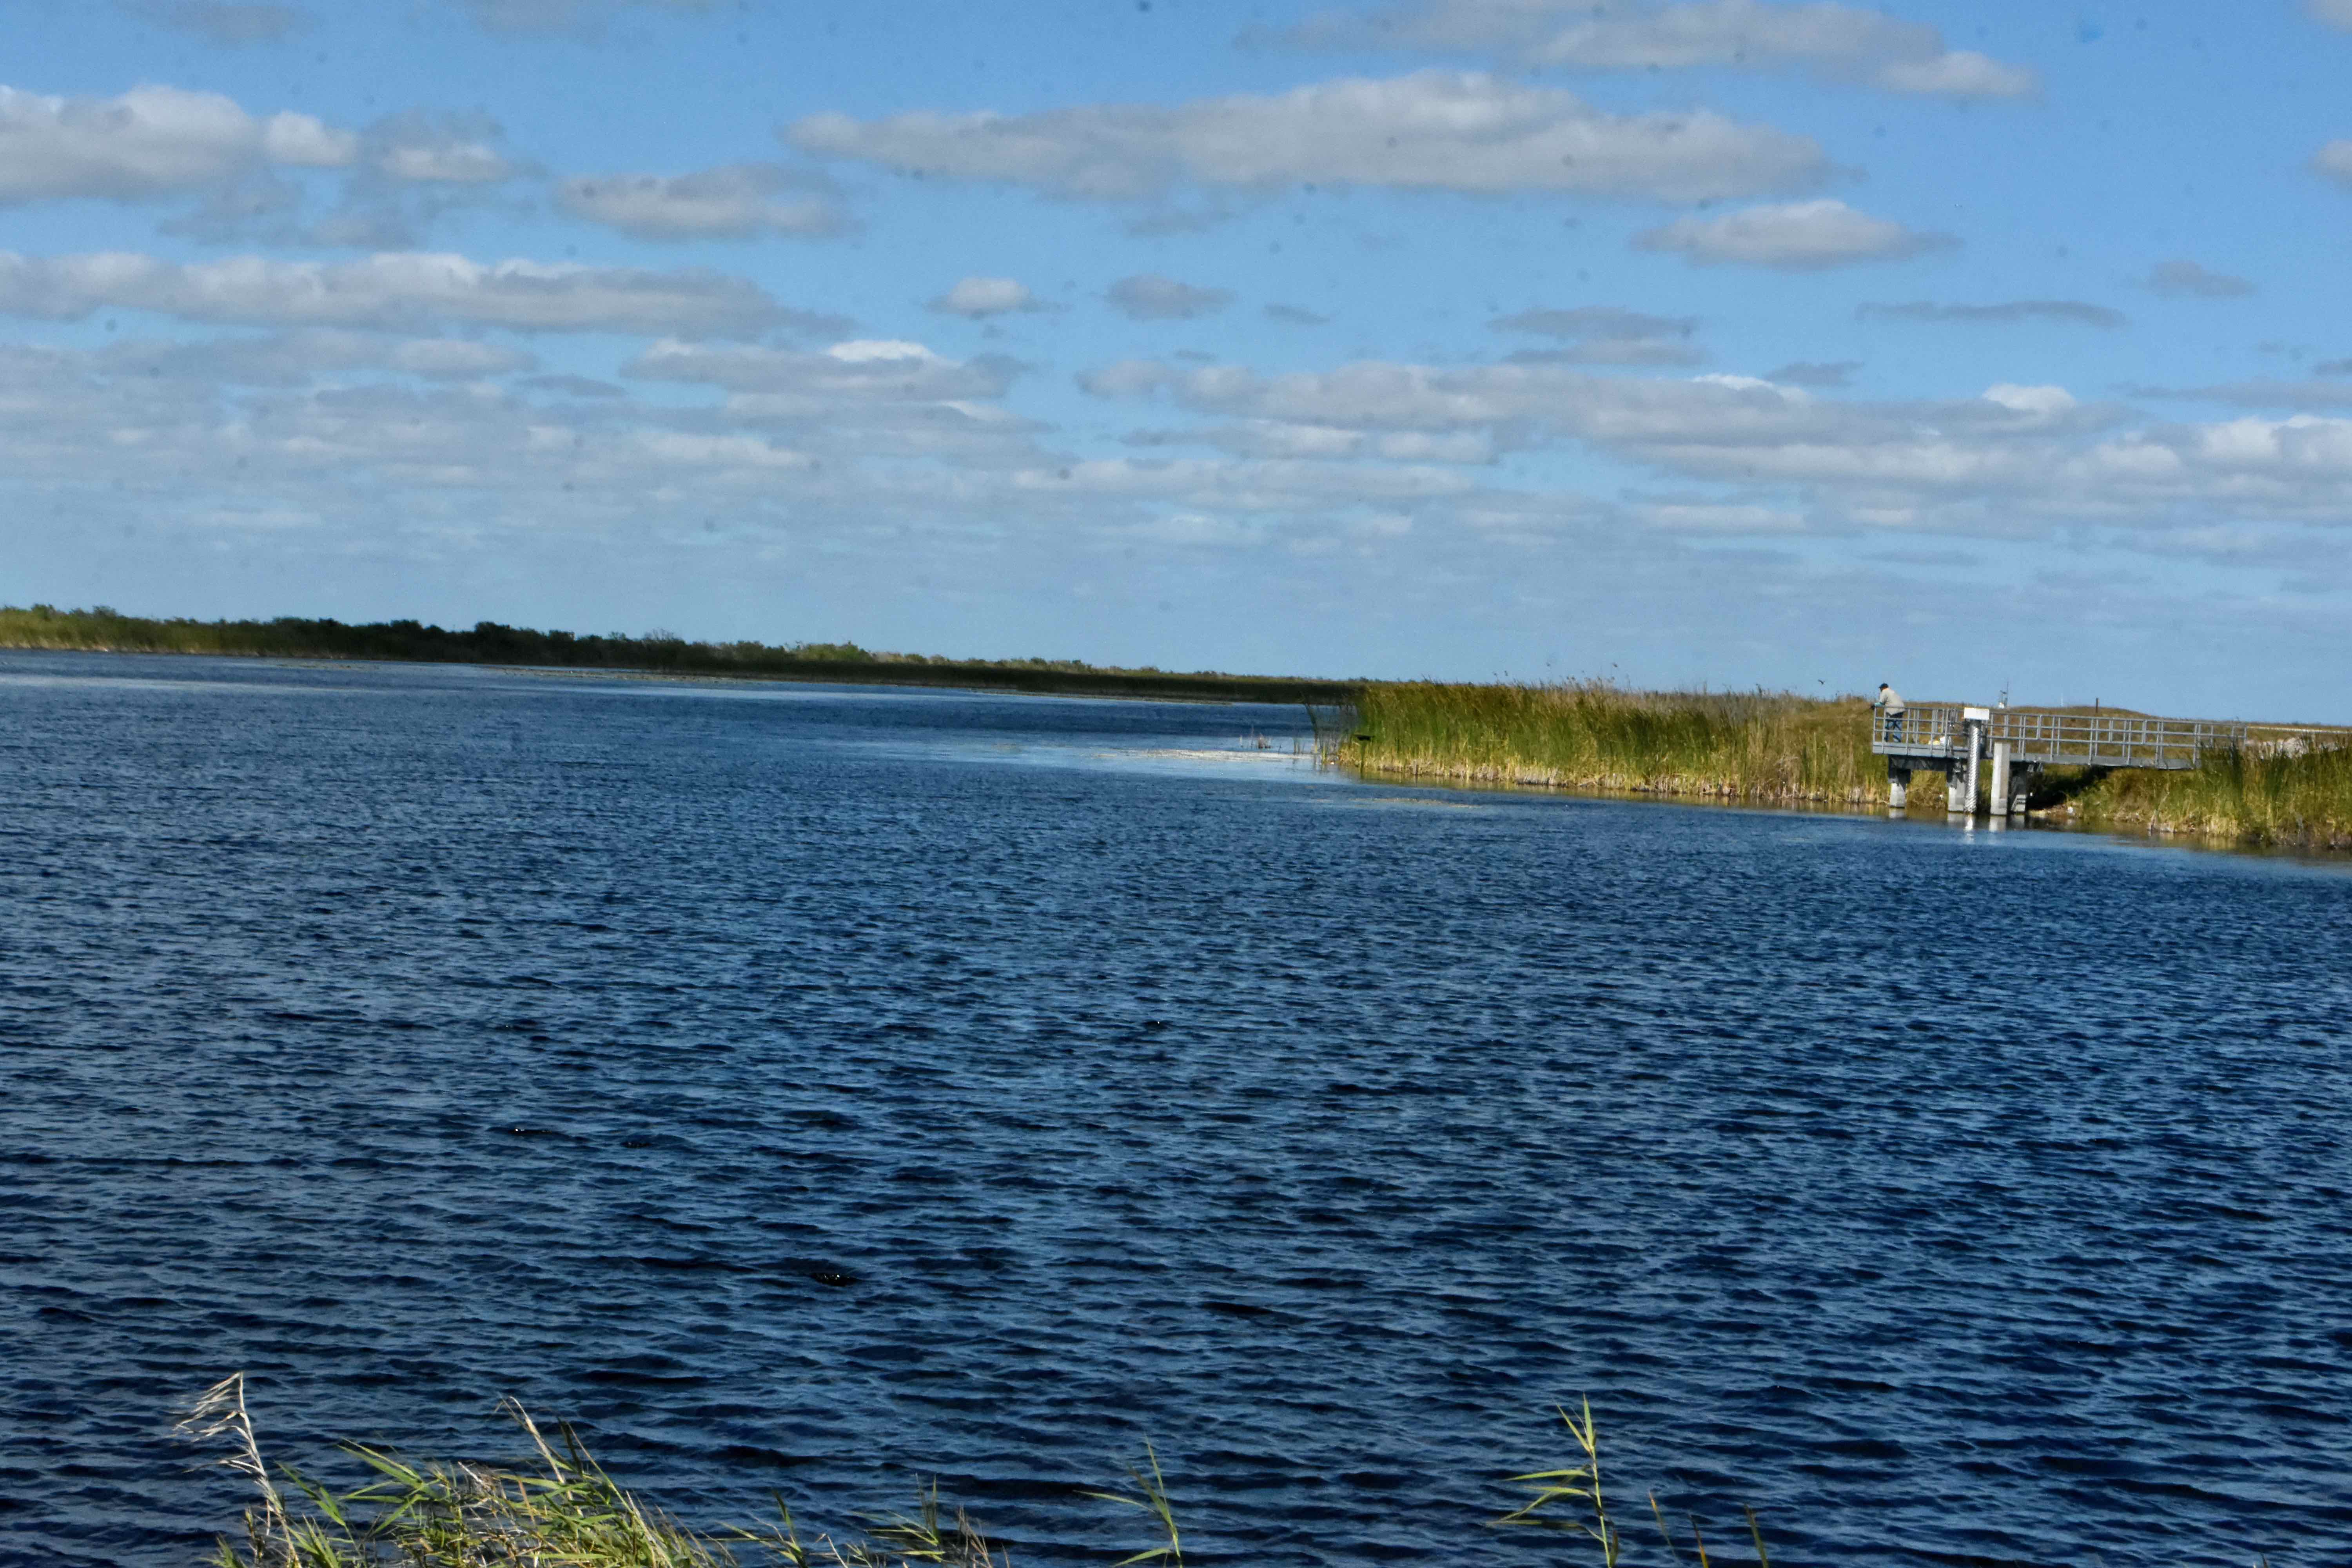 south end of Loxahatchee